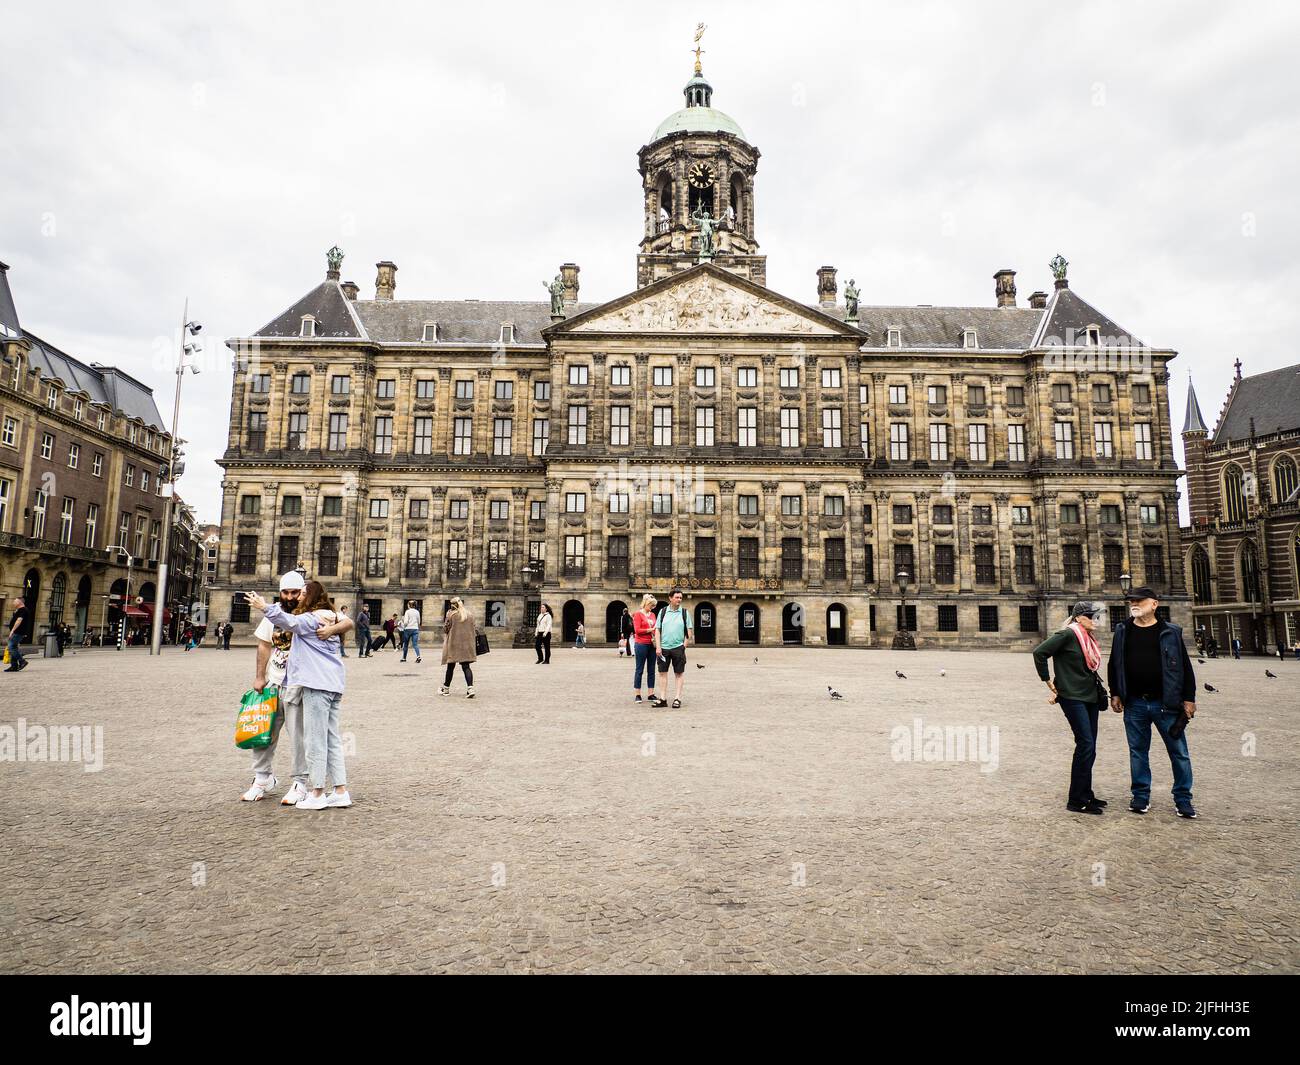 Tourists in front of the Royal palace on Dam Square, Amsterdam Stock Photo